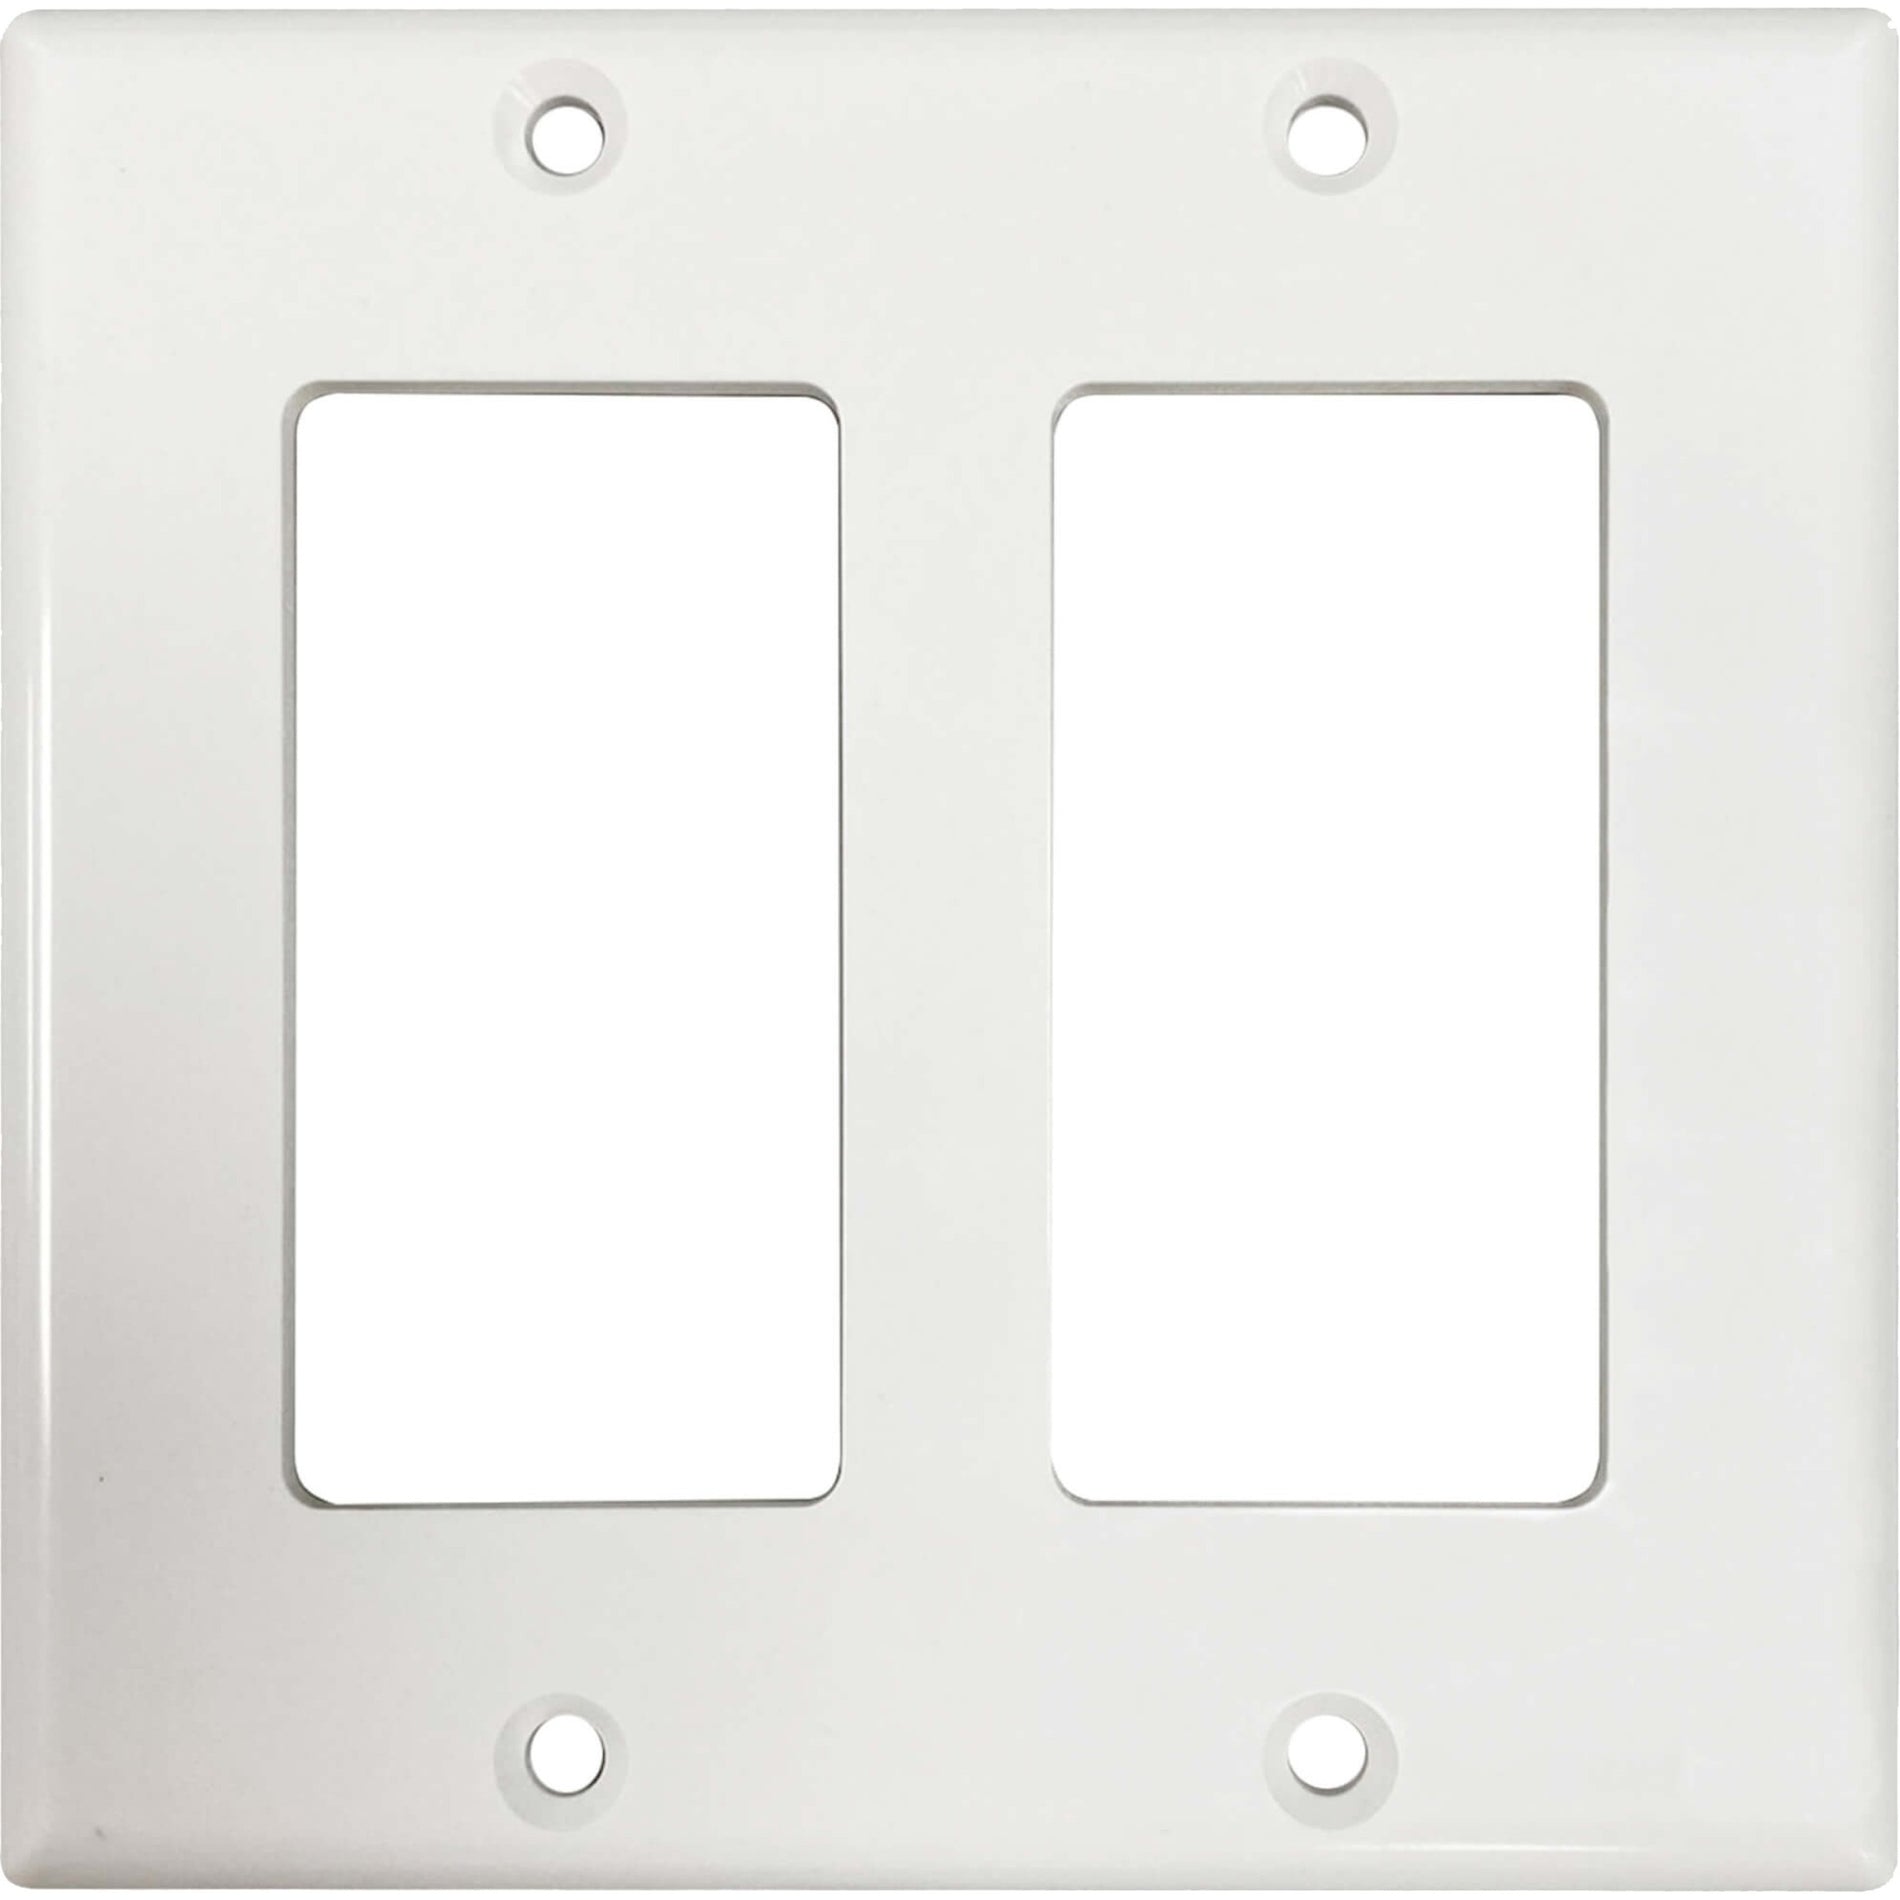 Tripp Lite N042DAB-002-IV Safe-IT Double-Gang Antibacterial Wall Plate, Decora Style, Ivory, TAA, Kitchen, Home Theater, VoIP, Home, Office, Audio/Video Device, Voice, Cable, Data, School, Business, Restaurant, Room